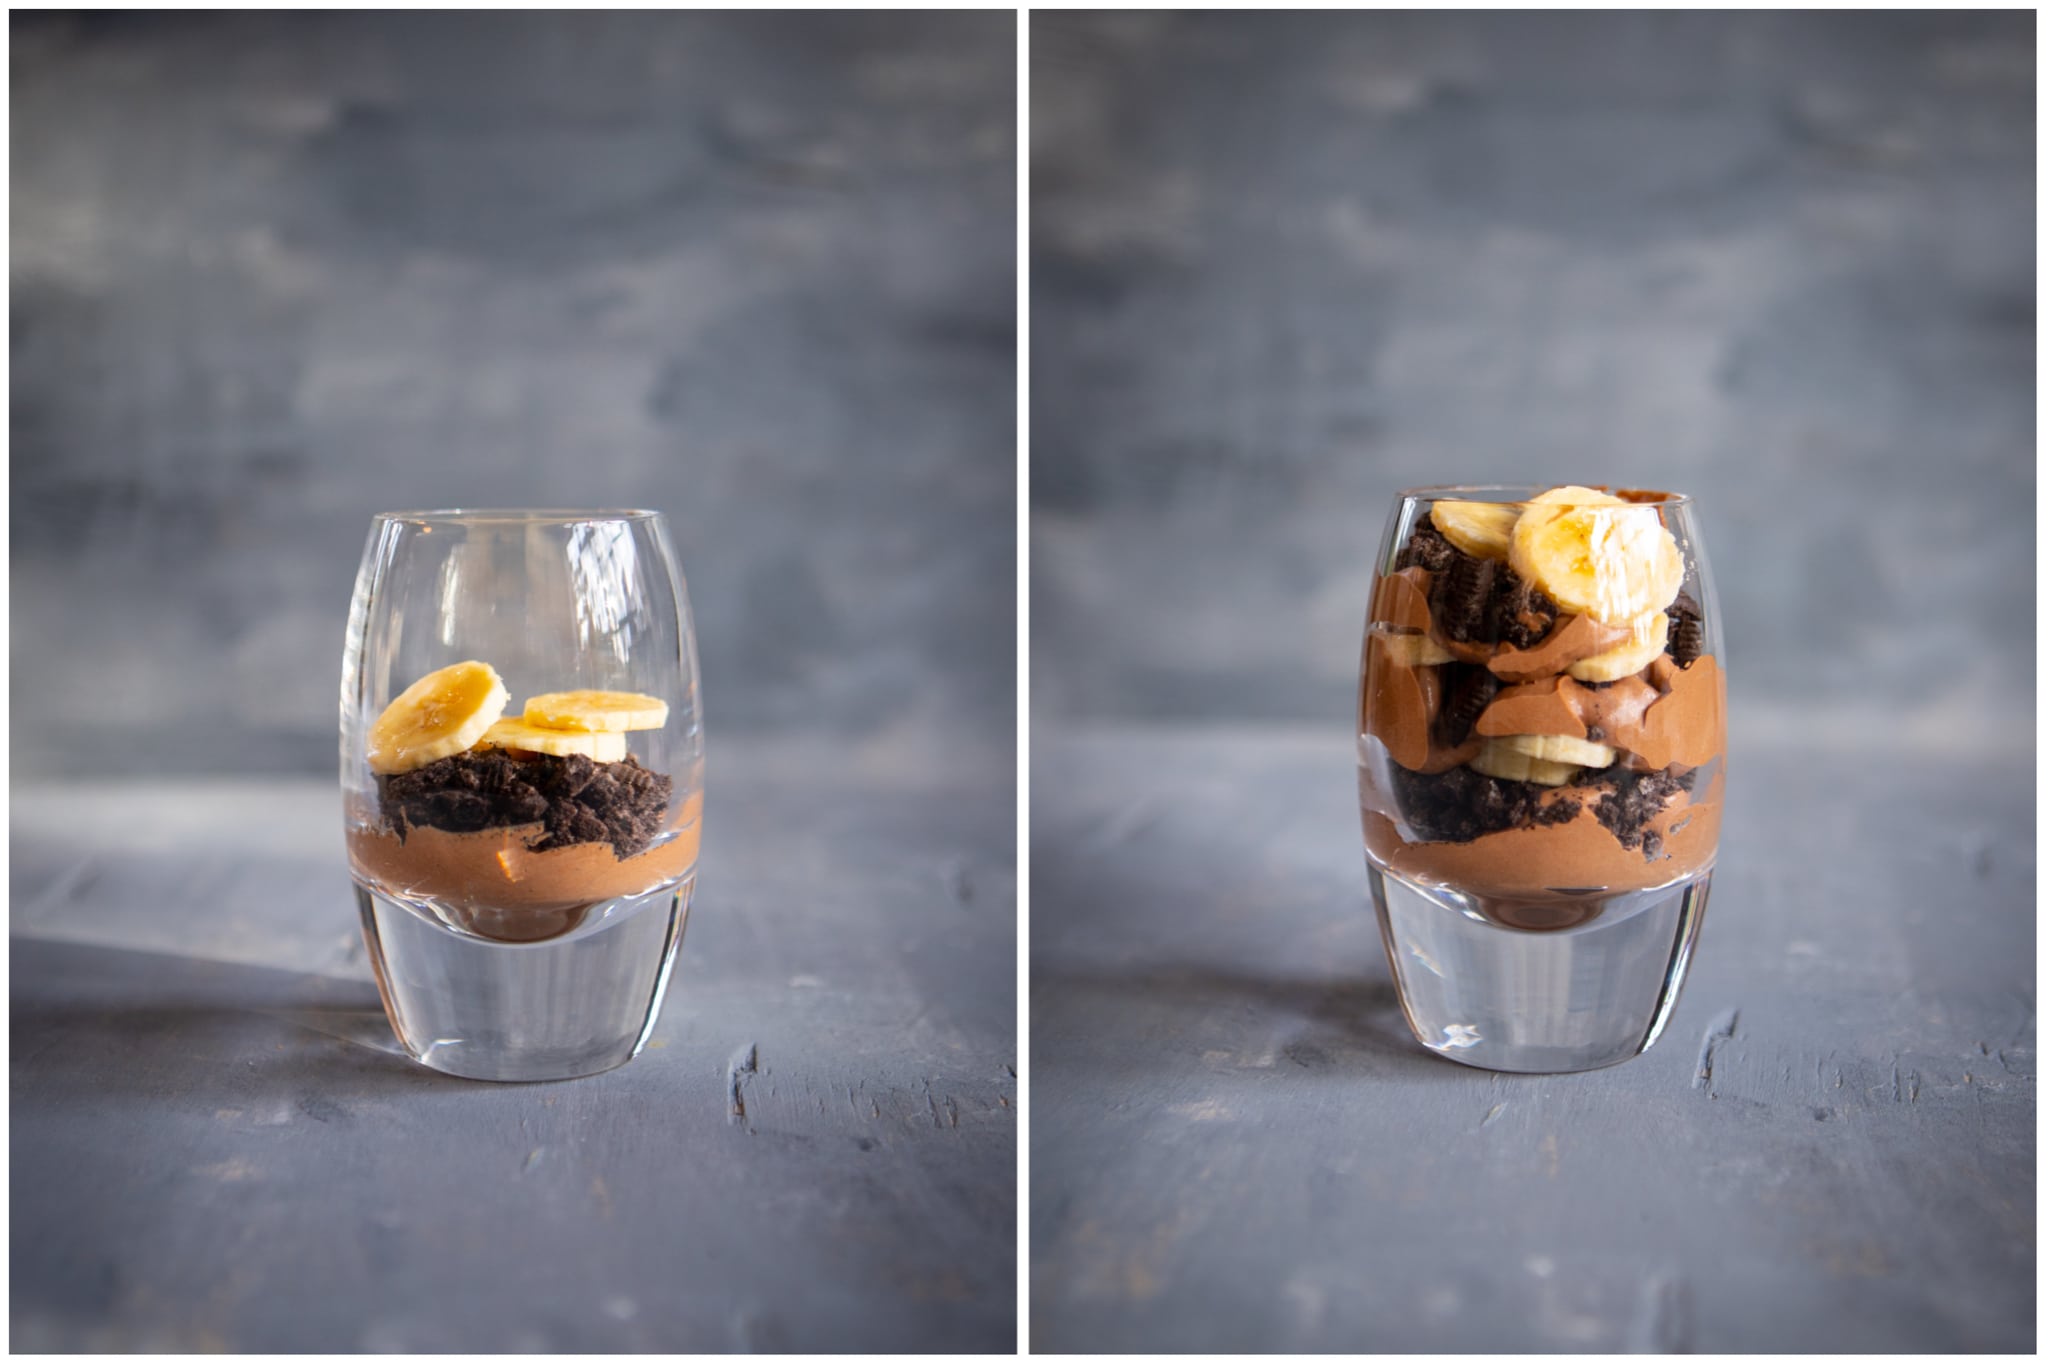 Two photos of Chocolate Banana Pudding being made, side by side, at different steps in the process. On the left, a glass with one layer of chocolate mousse, cookie crumbs, and bananas. And on the right, all of the layers of ingredients added to create a full glass of dessert.